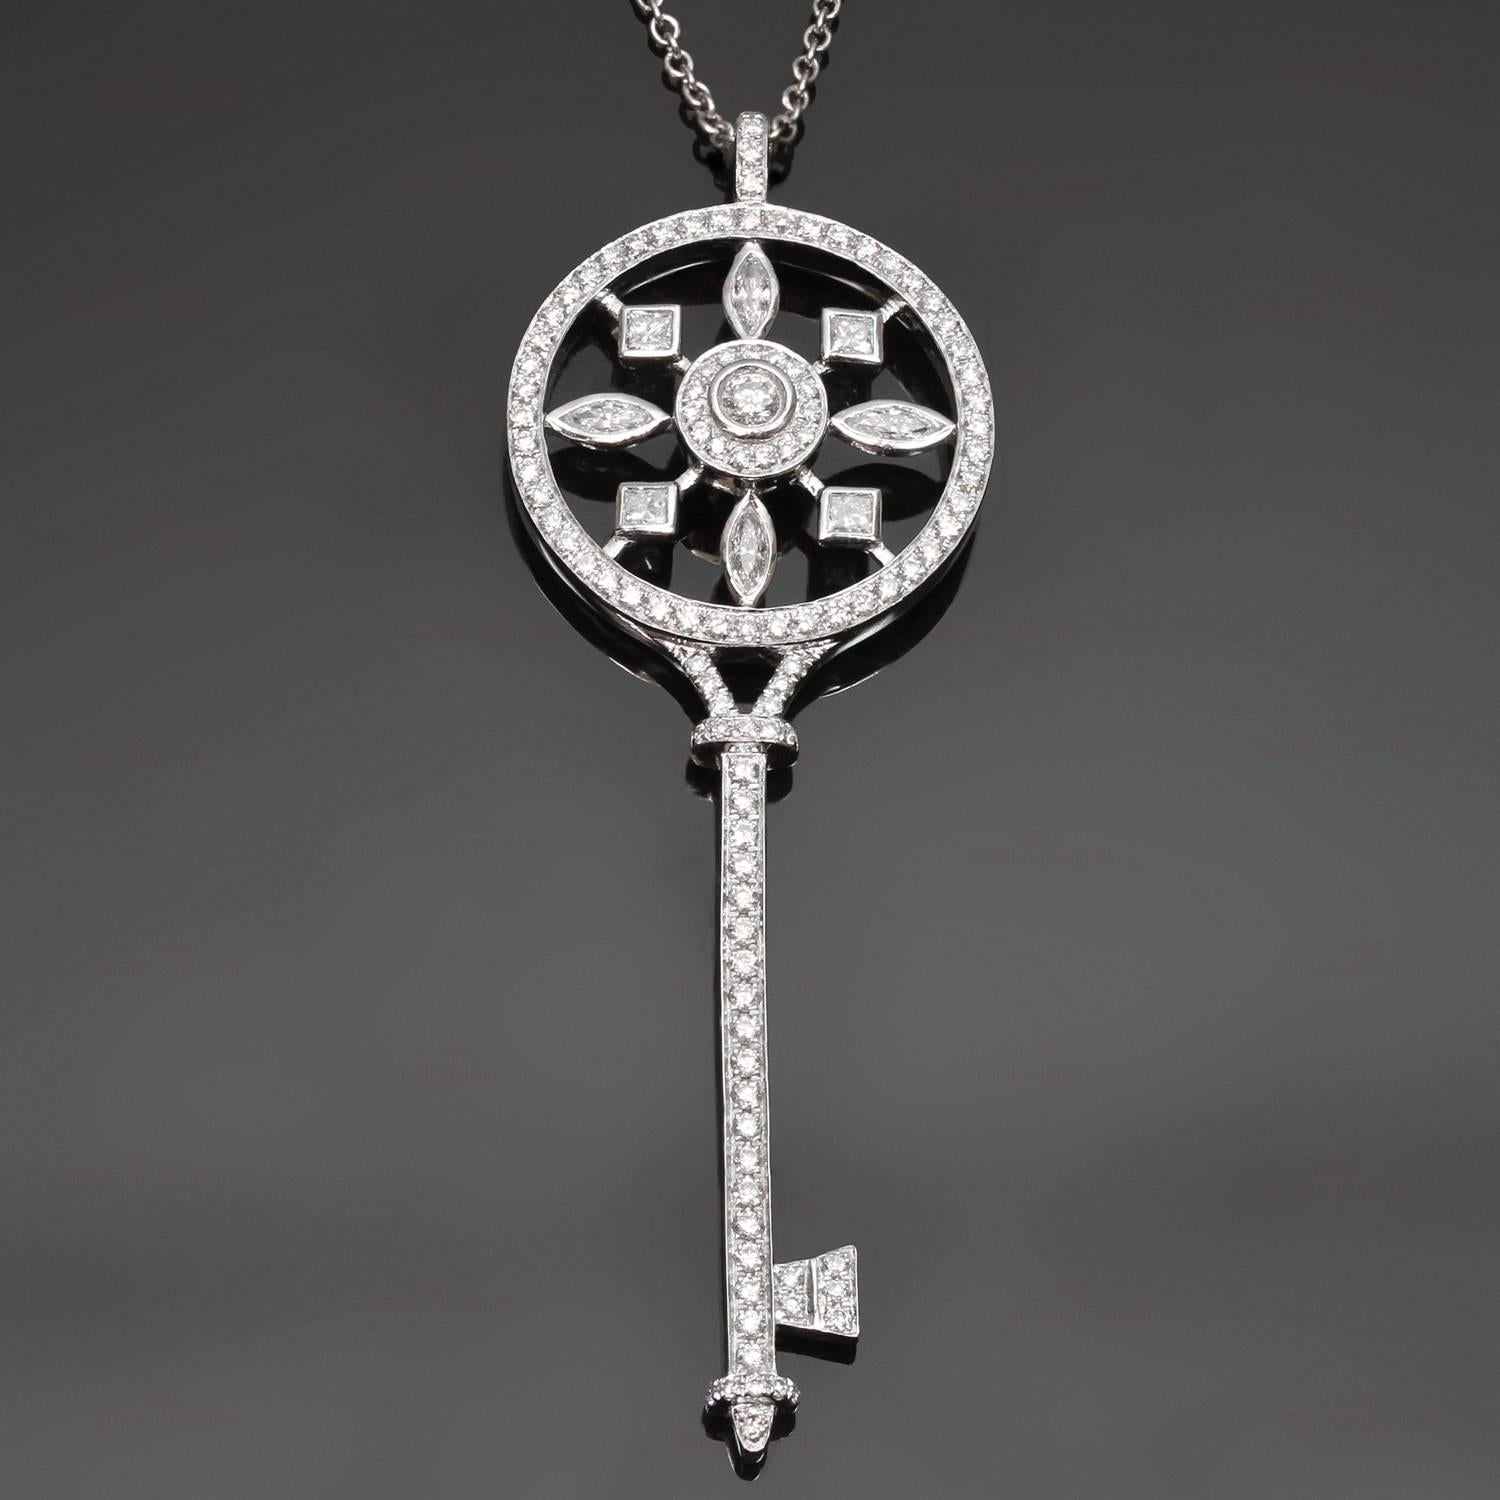 This fabulous Tiffany necklace features a kaleidoscope key pendant crafted in platinum and set with marquise, square and round brilliant-cut diamonds of an estimated 1.20 carats. The mixed-cut diamonds add a striking brilliance to this stunningly